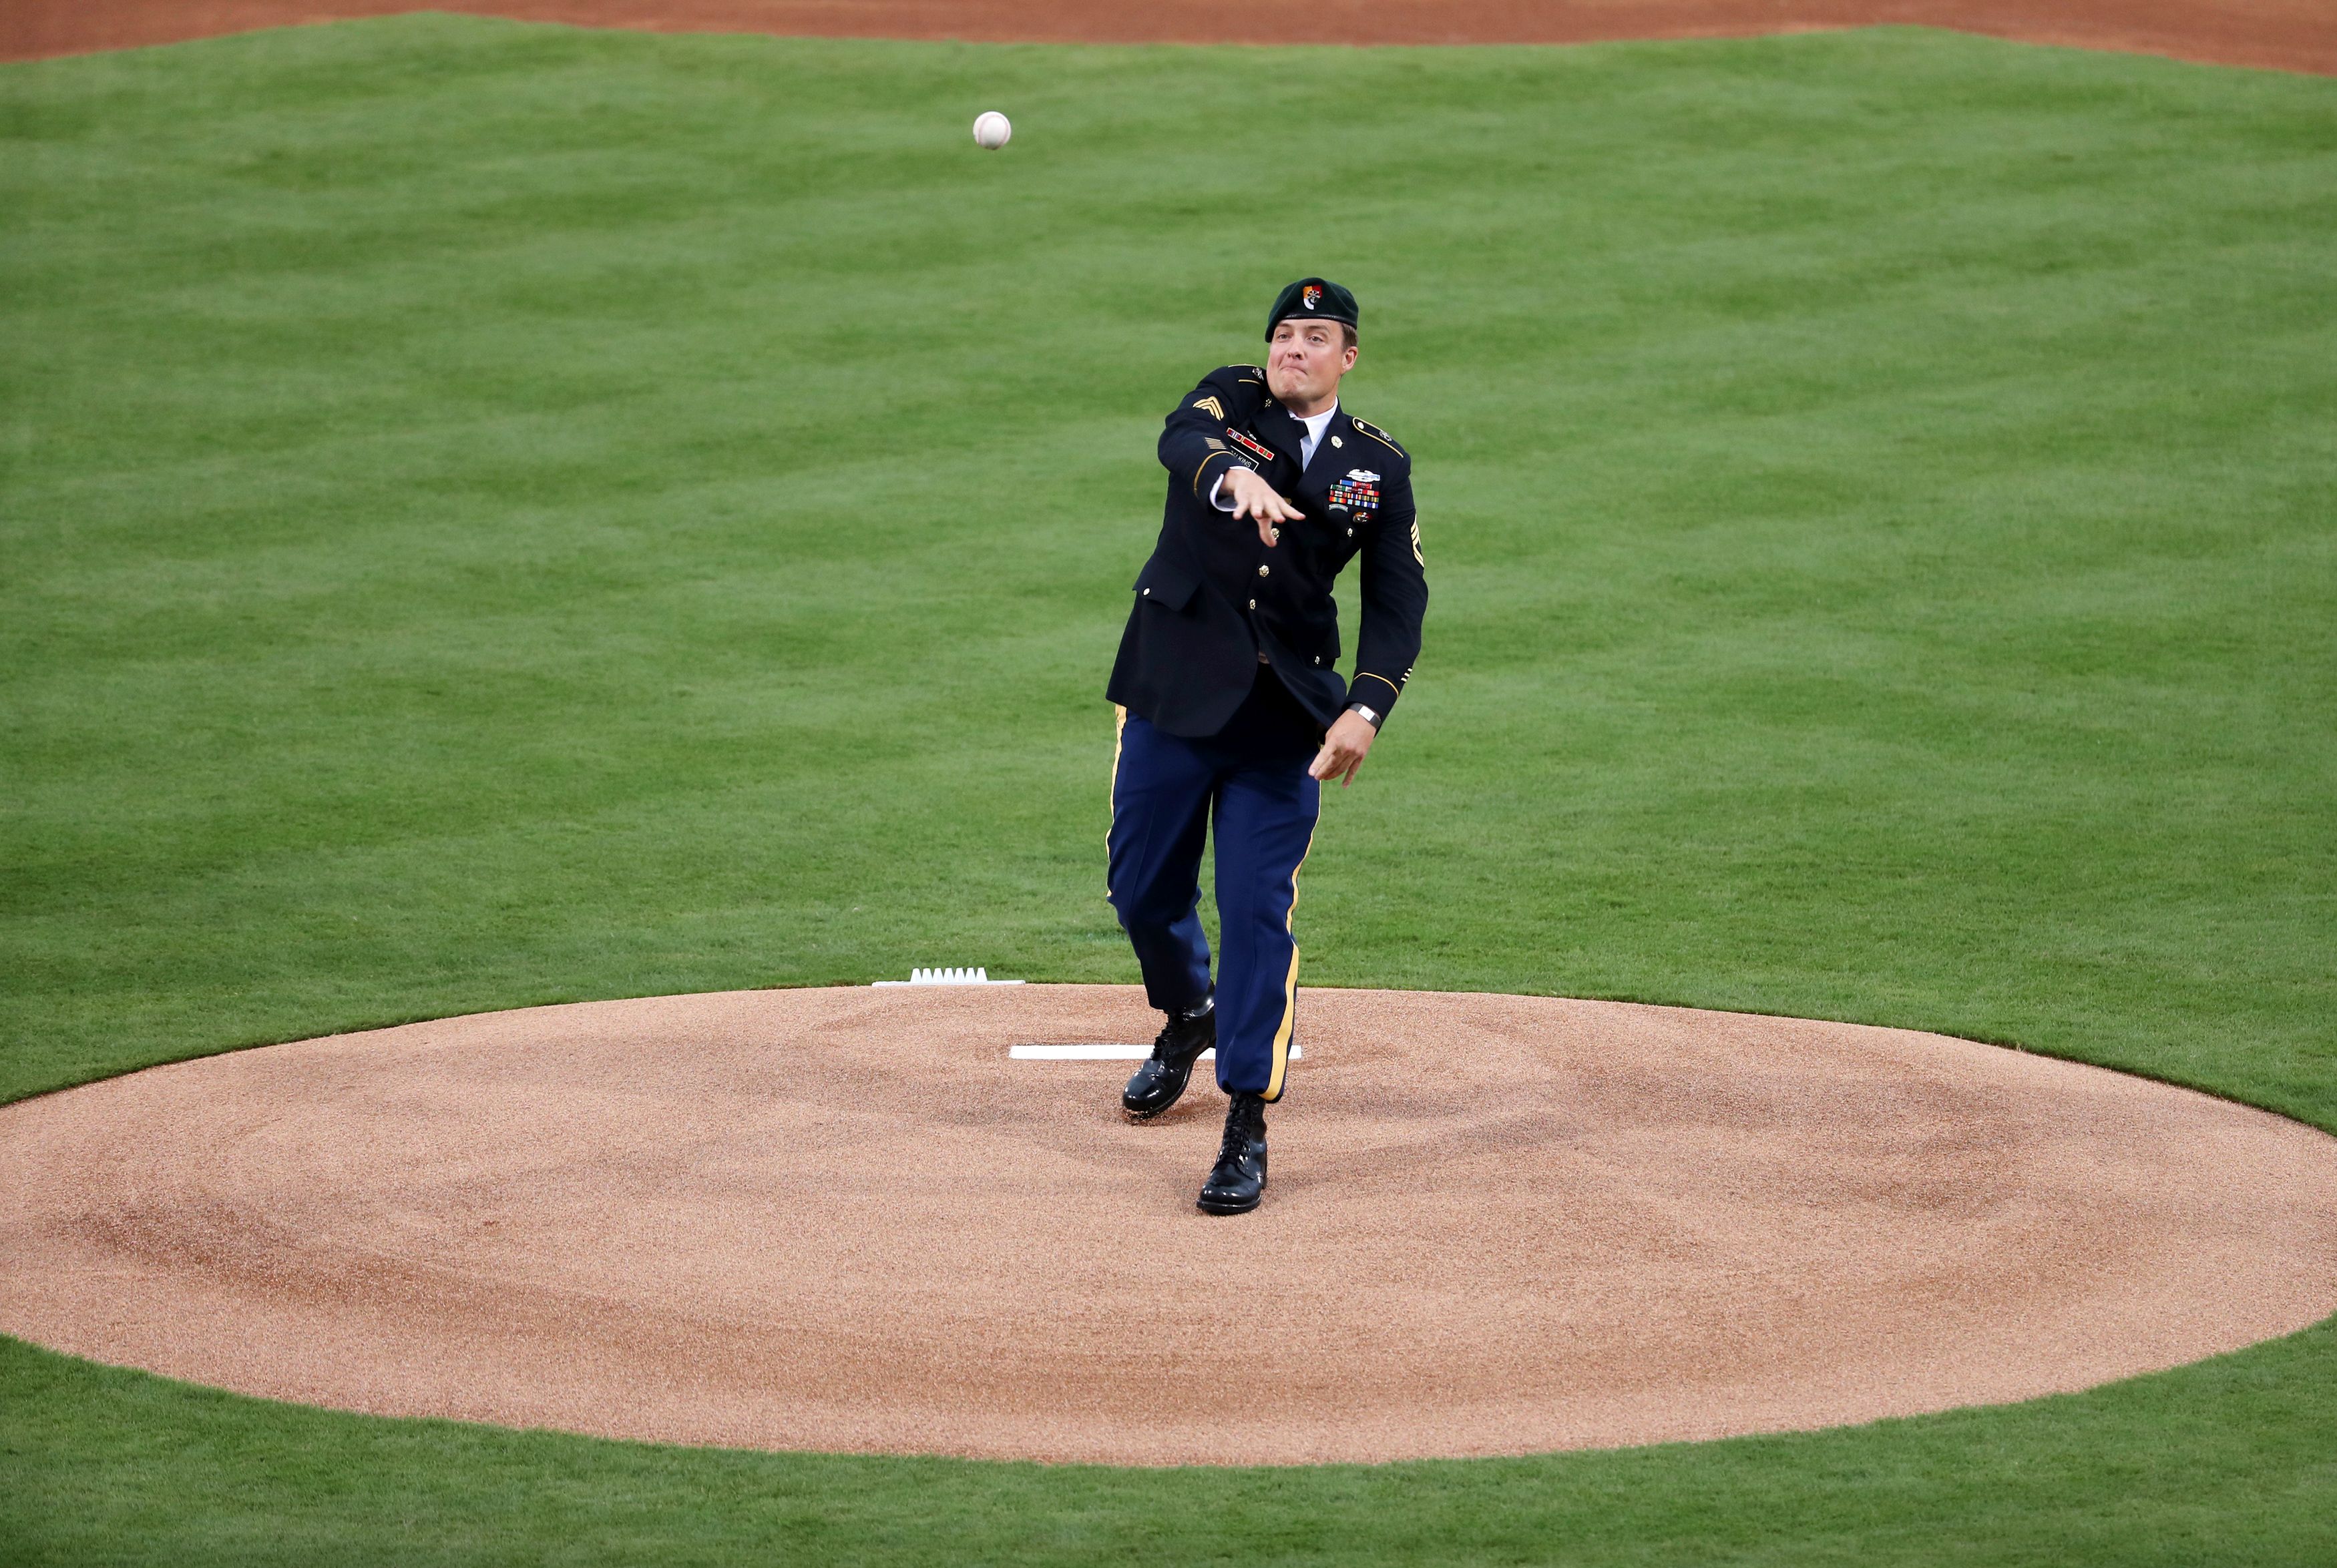 First Pitch Photos Marlins vs. Braves at Ft. Bragg ESPN